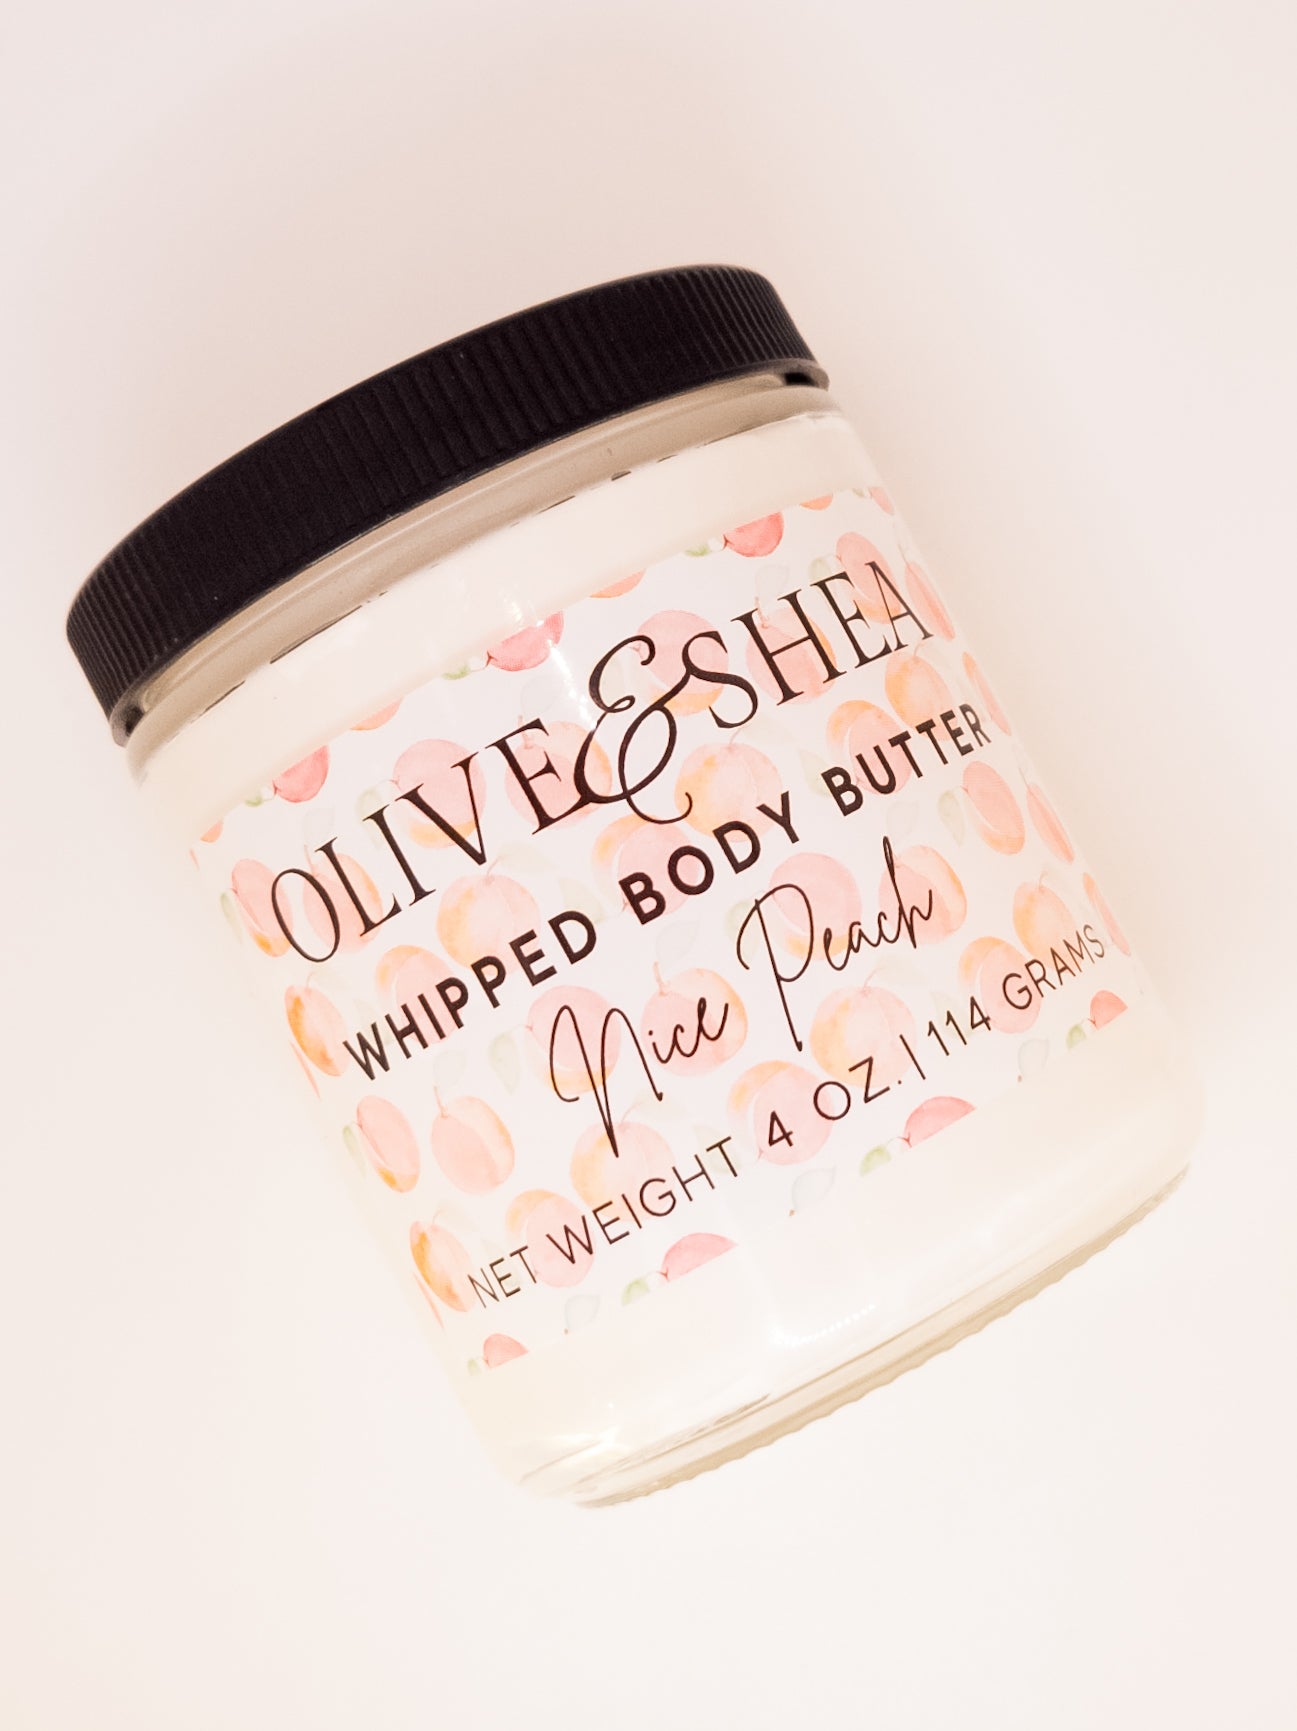 Nice Peach Whipped Body Butter